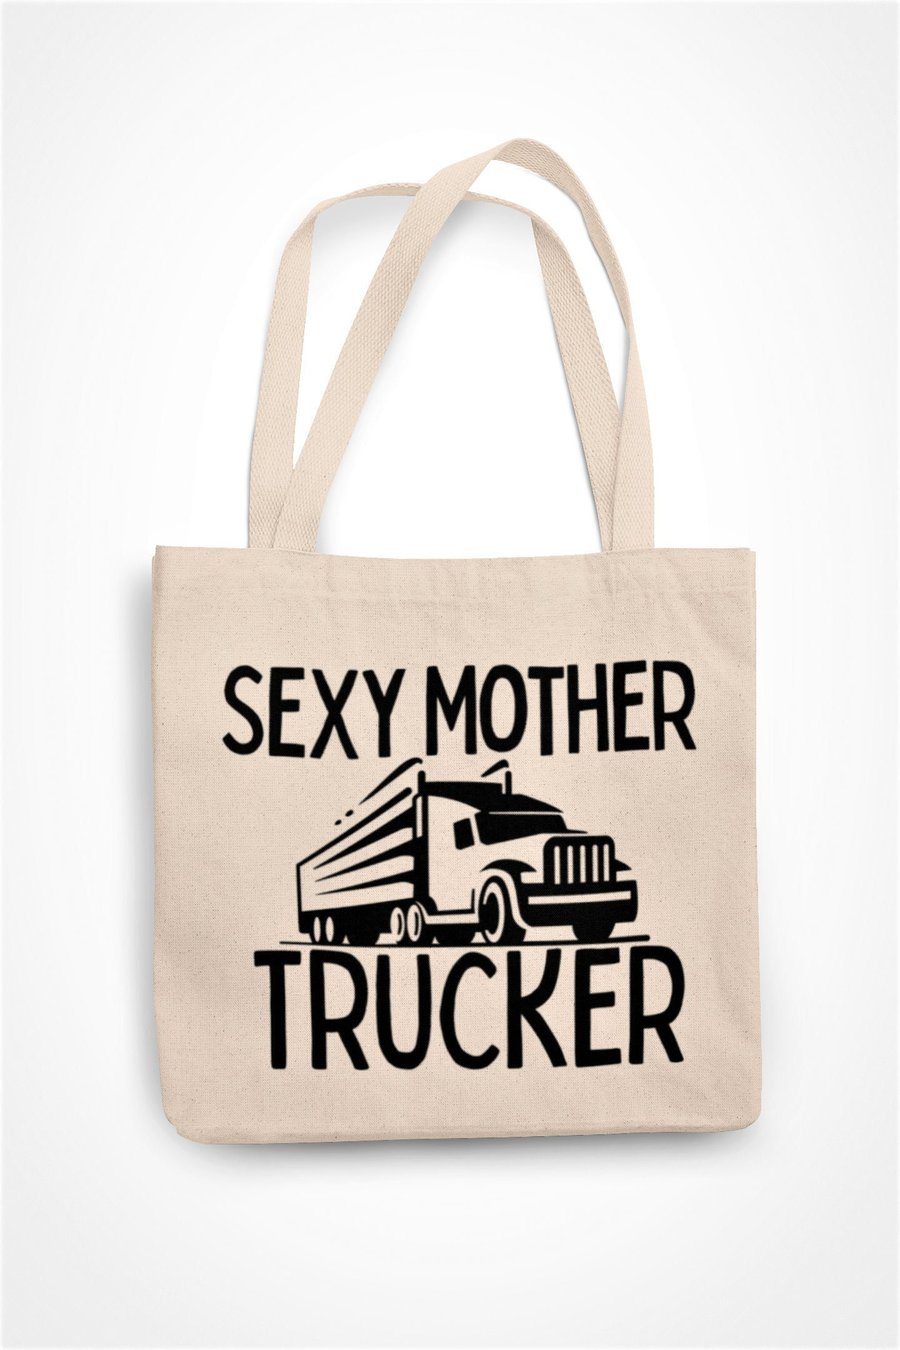 Sexy Mother Trucker Tote Bag Funny Novelty Truck Driver Shopper Bag Funny Gift 